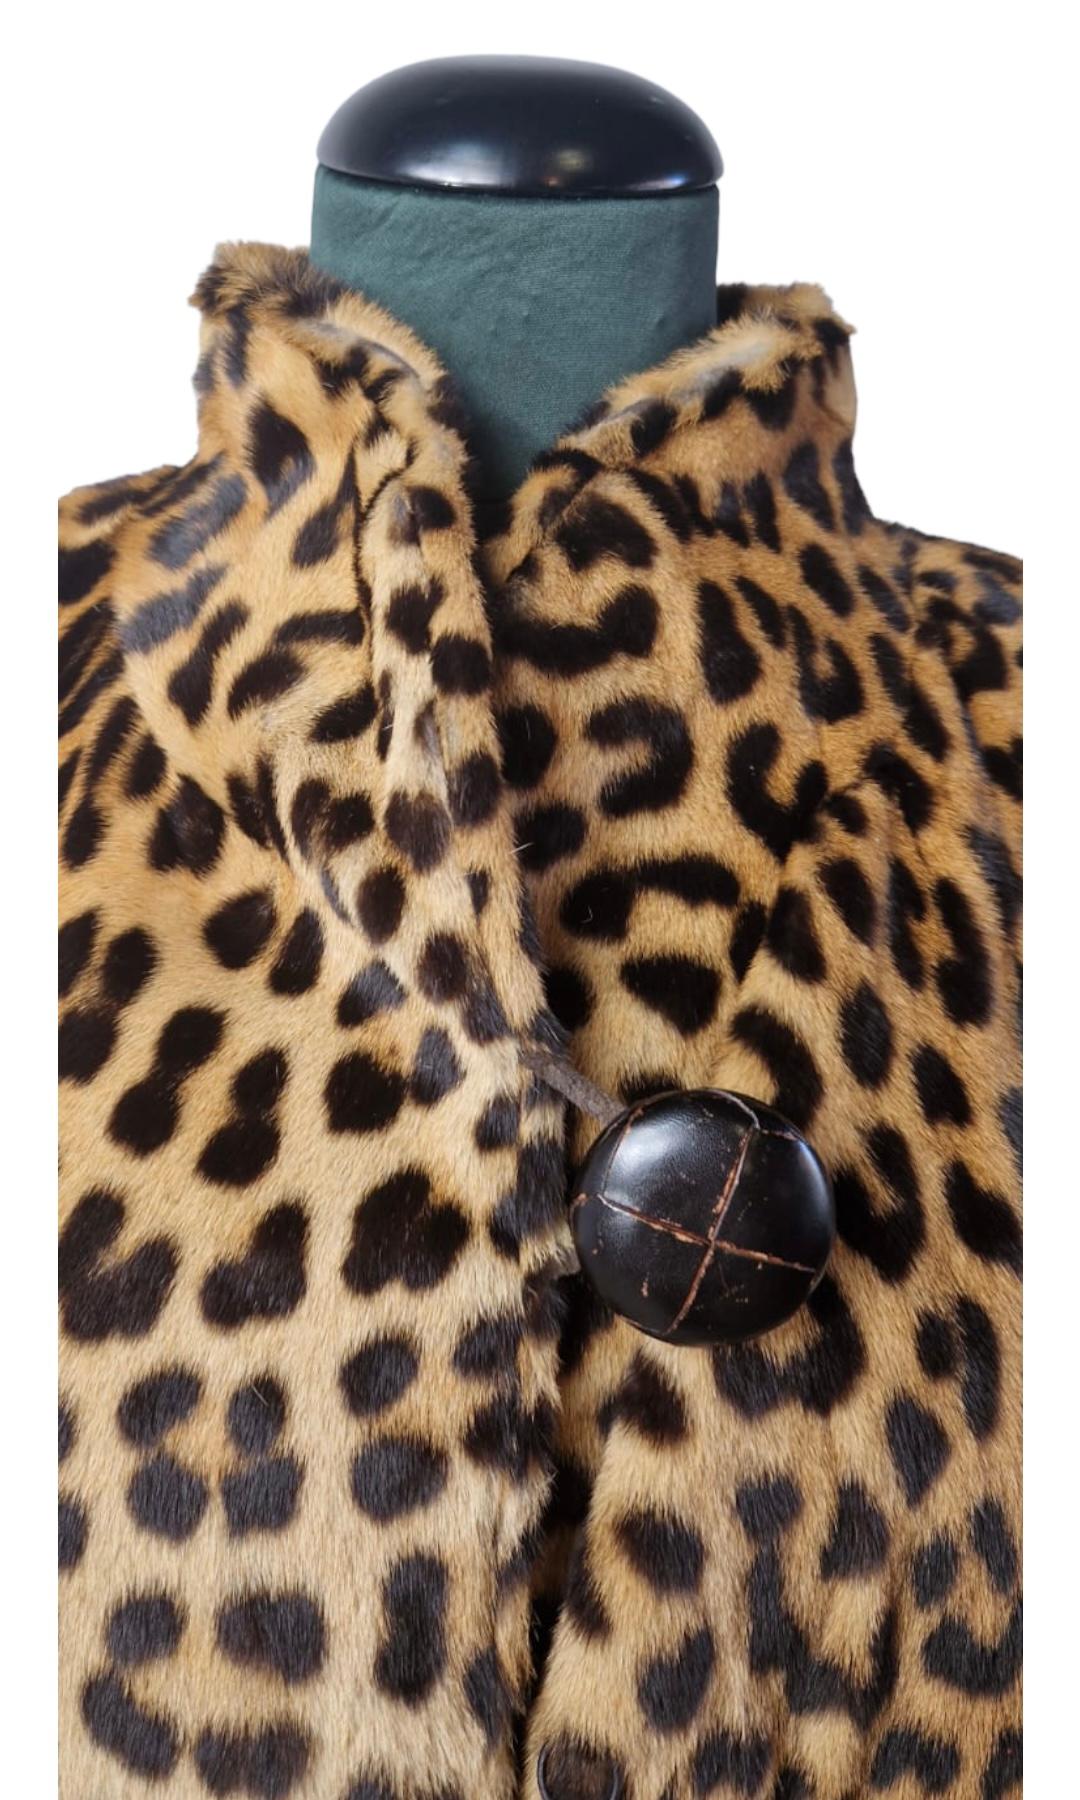 Vintage leopard fur. Button closure on the neckline. Sale allowed only in Europe. Shoulders 40 cm, length 111 cm, sleeves 60 cm and breast 46 cm. In very good condition.